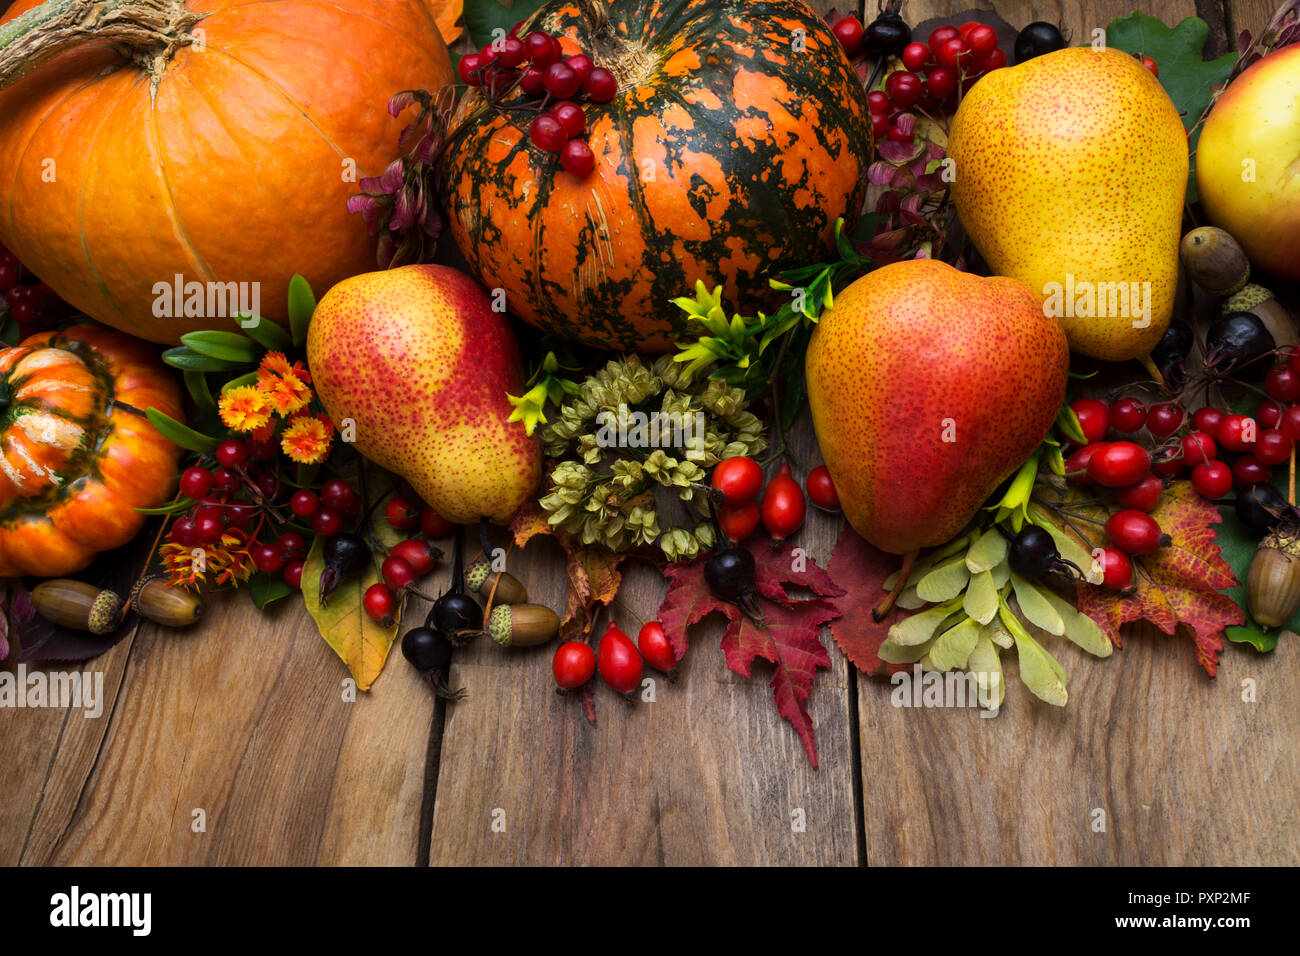 Thanksgiving rustic holiday arrangement with pumpkin, oak, pear, fall leaves and berry Stock Photo